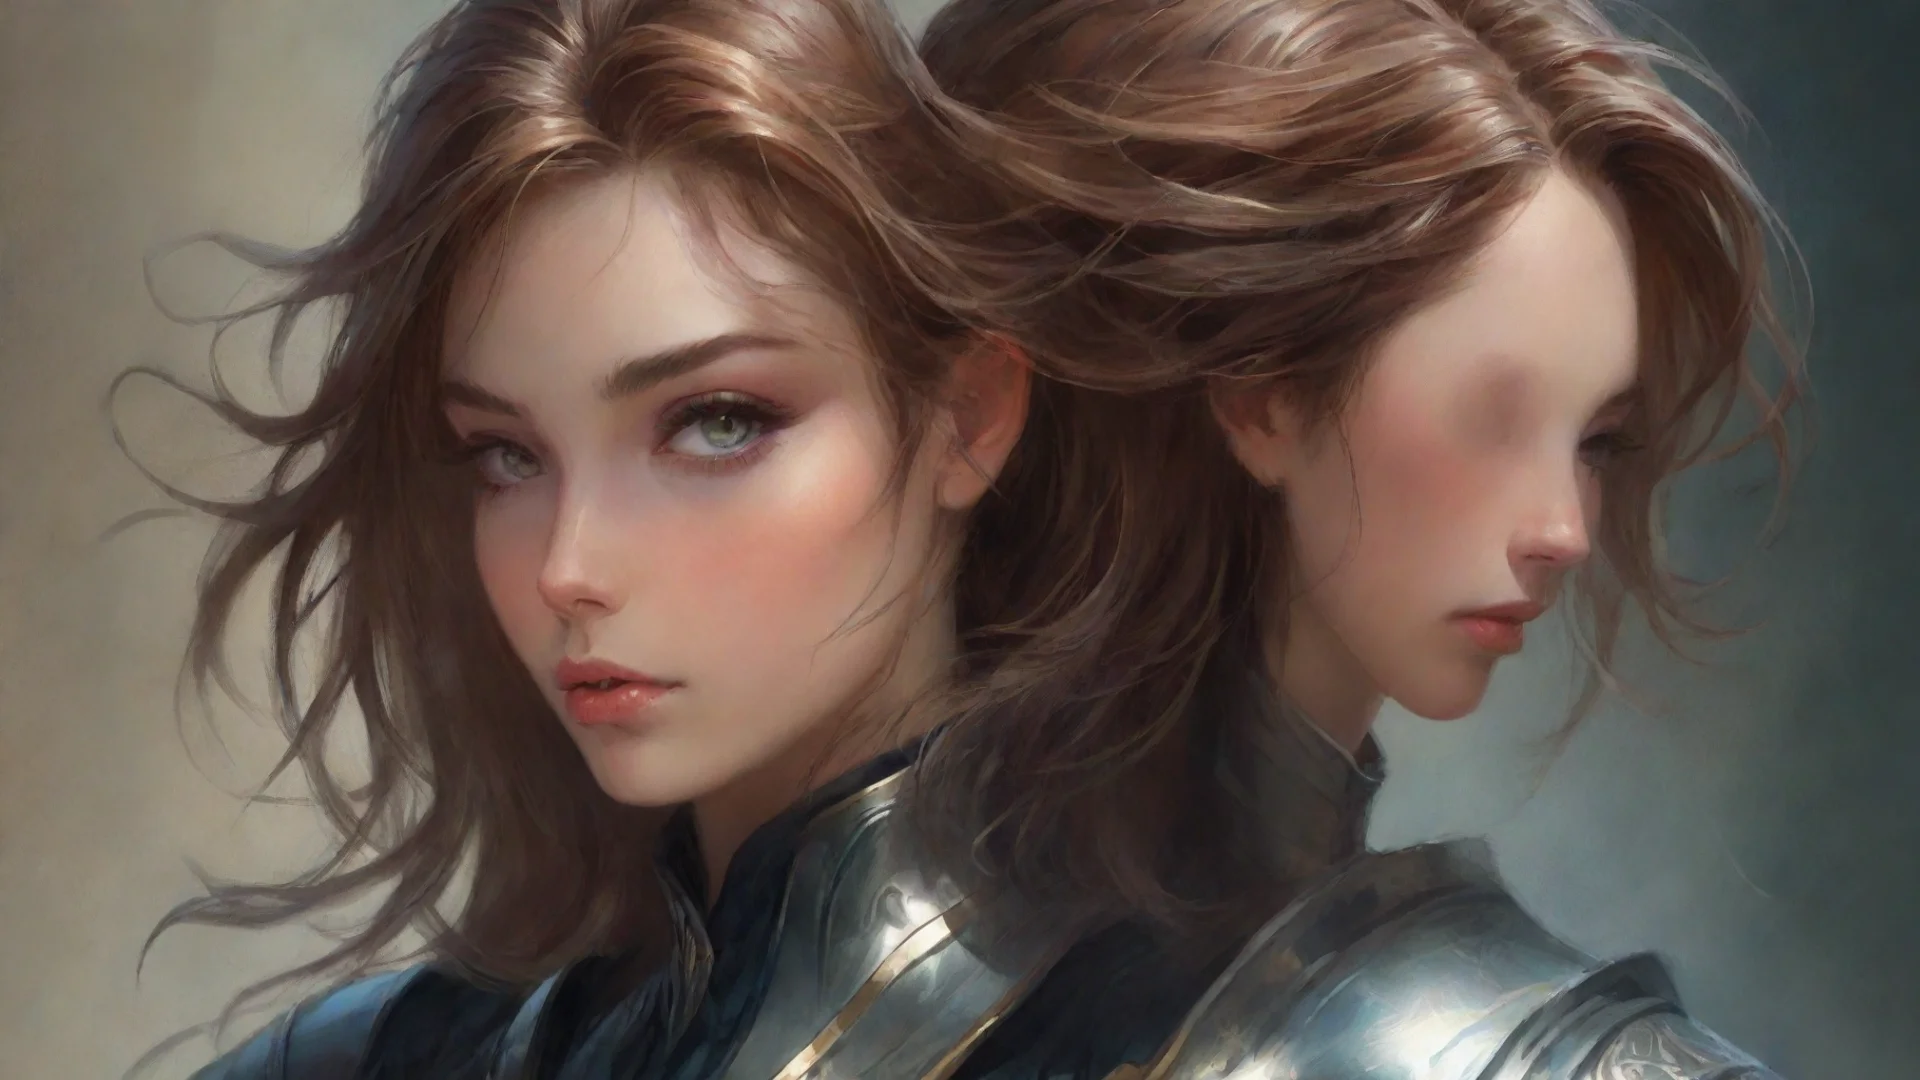 aitrending stunning portrait illustration beautiful androgynous wizard knight by ross tran by charlie bowater illustration highly d good looking fantastic 1 wide